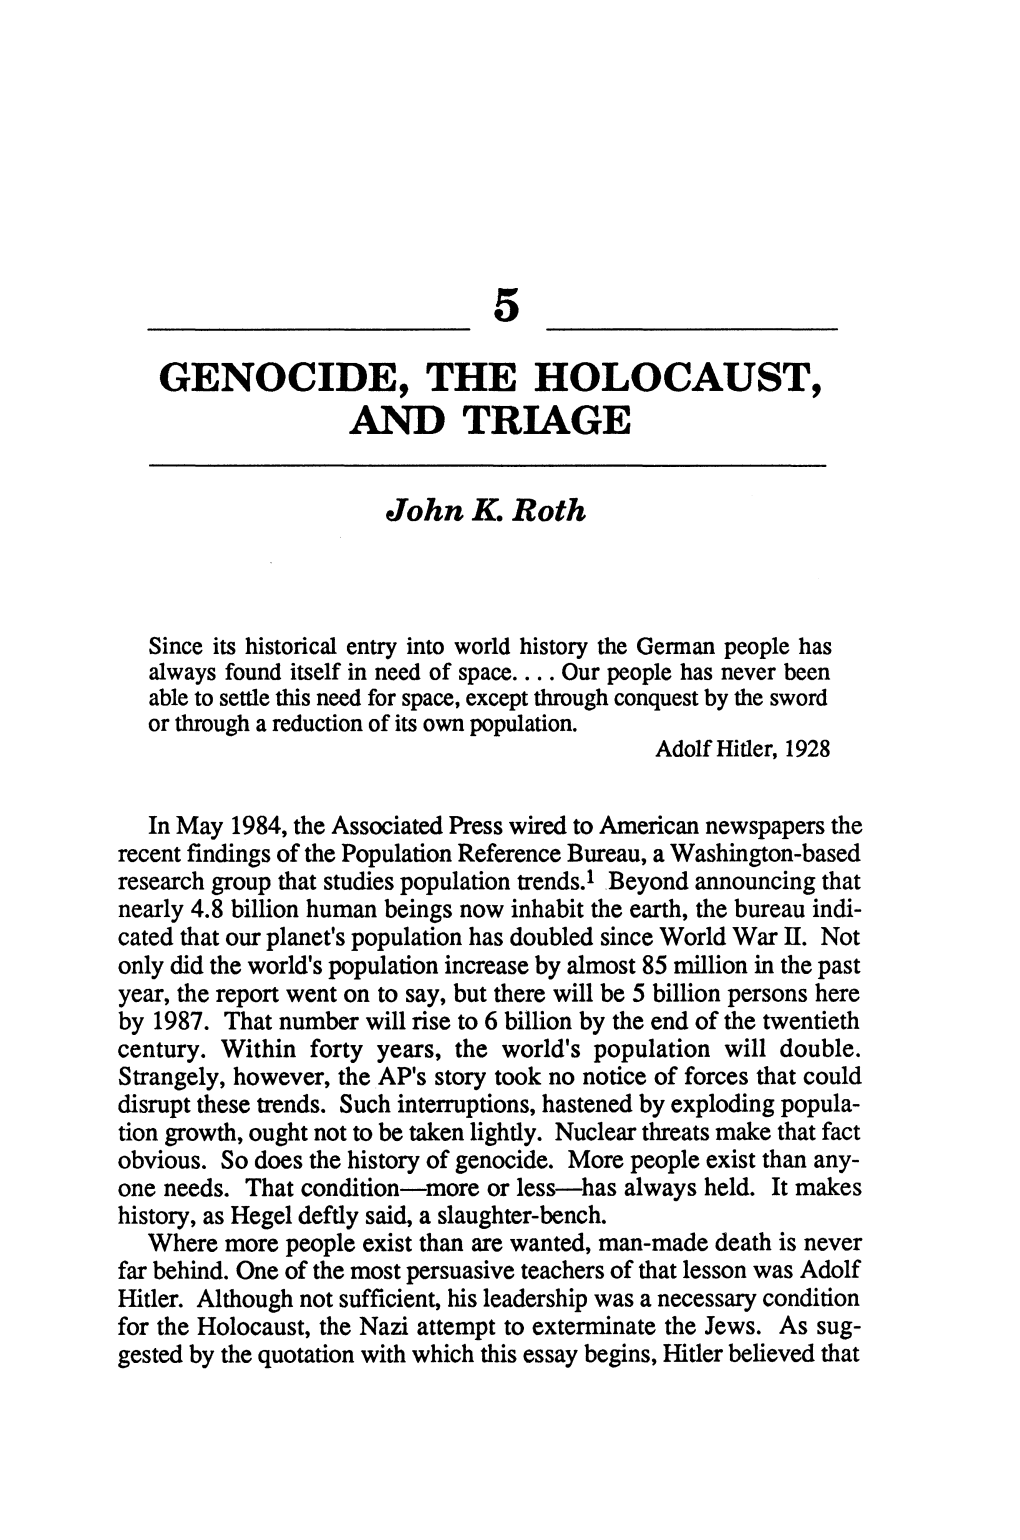 Genocide, the Holocaust, and Triage